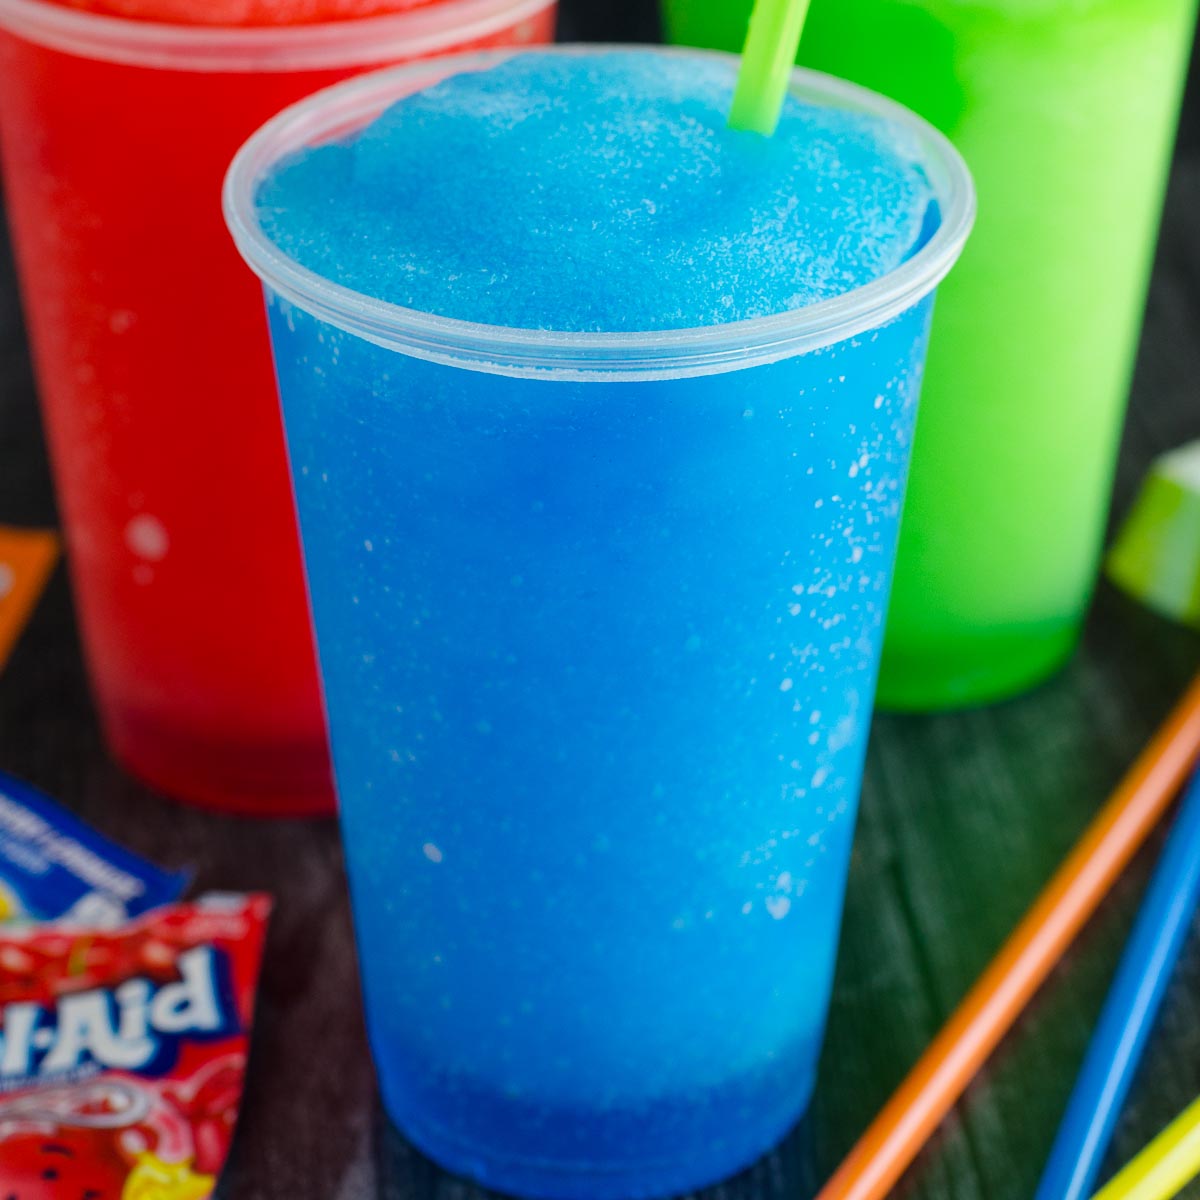 https://www.seededatthetable.com/wp-content/uploads/2020/05/How-to-Make-a-Slushie-SQUARE.jpg